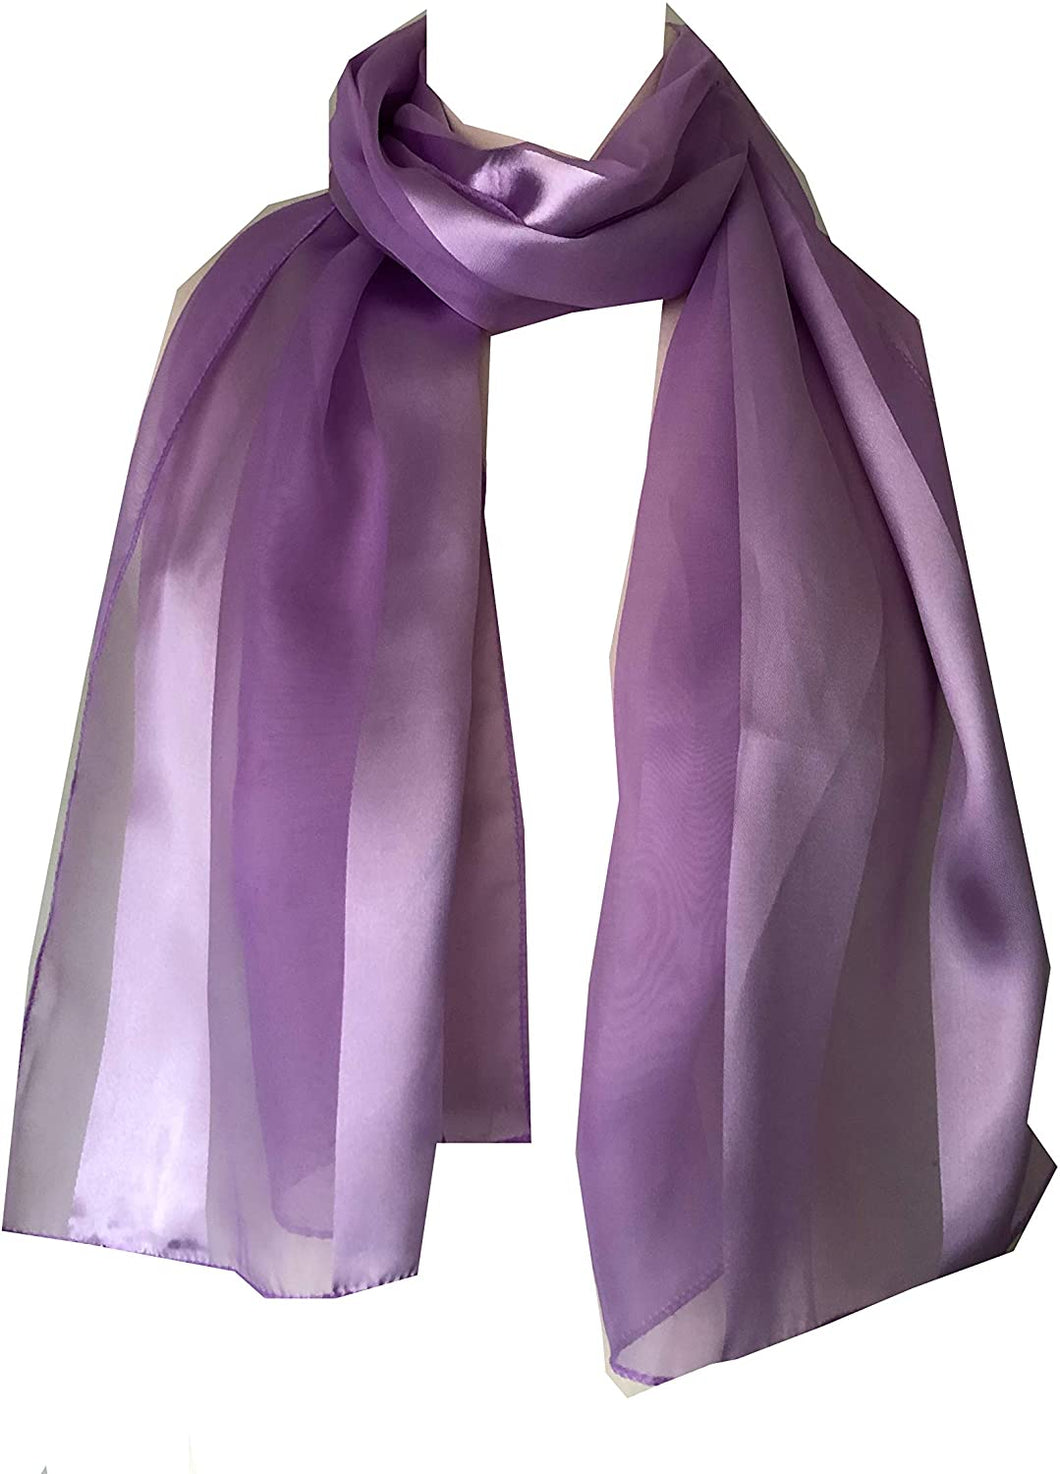 Plain Lilac Faux Chiffon and Satin Style Striped Scarf Thin Pretty Scarf Great for Any Outfit Lovely Gift